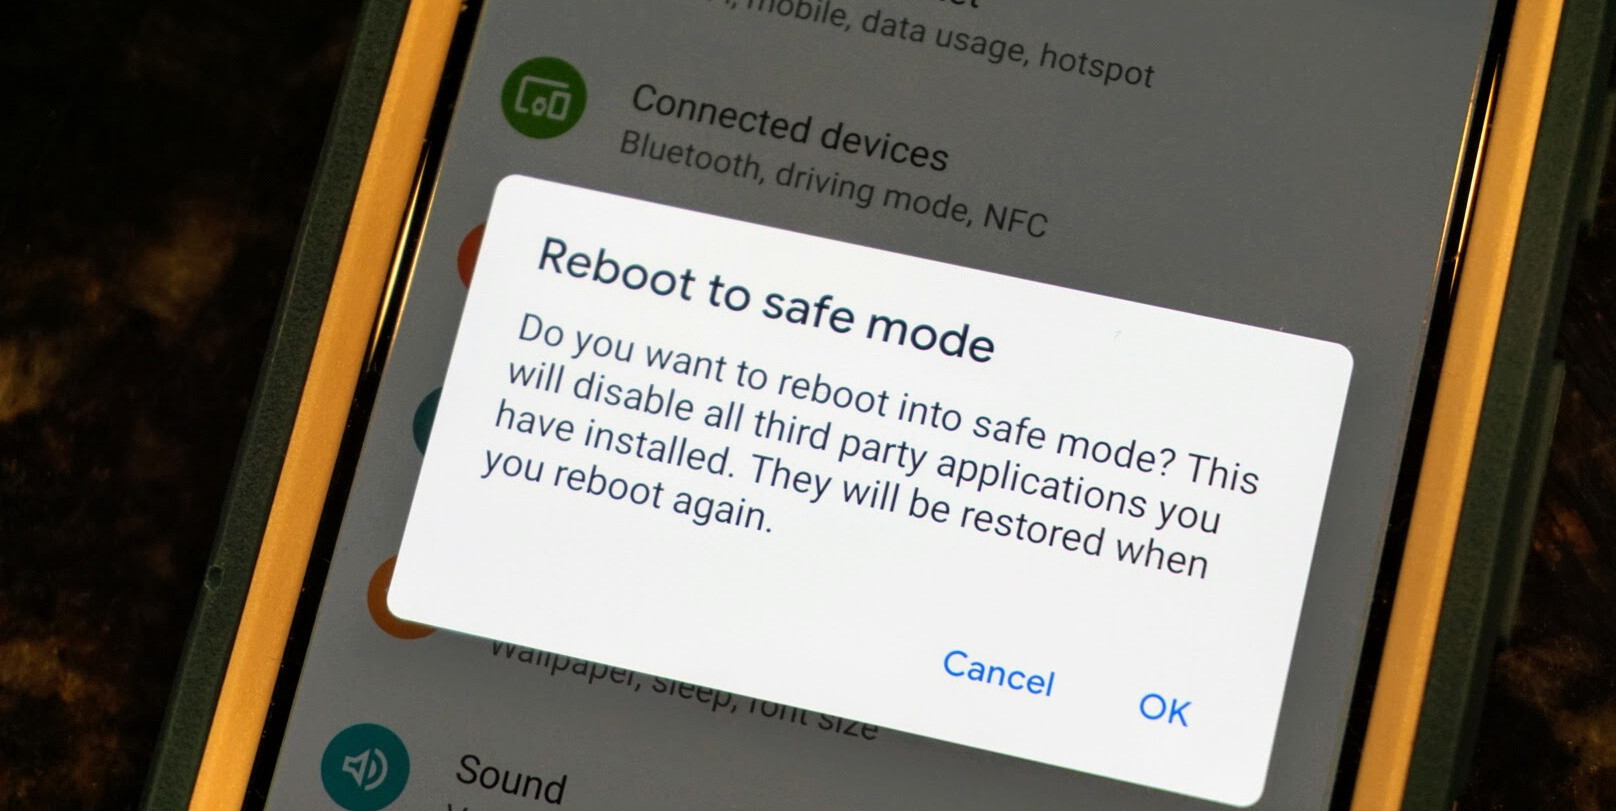 Boot into Safe Mode: By entering Safe Mode, you can determine if a third-party app is causing the restarts. If the phone operates normally in Safe Mode, it signifies an app conflict.
Perform a factory reset: This should be a last resort as it erases all data on your device. However, if all other troubleshooting steps fail, performing a factory reset can resolve persistent software issues.